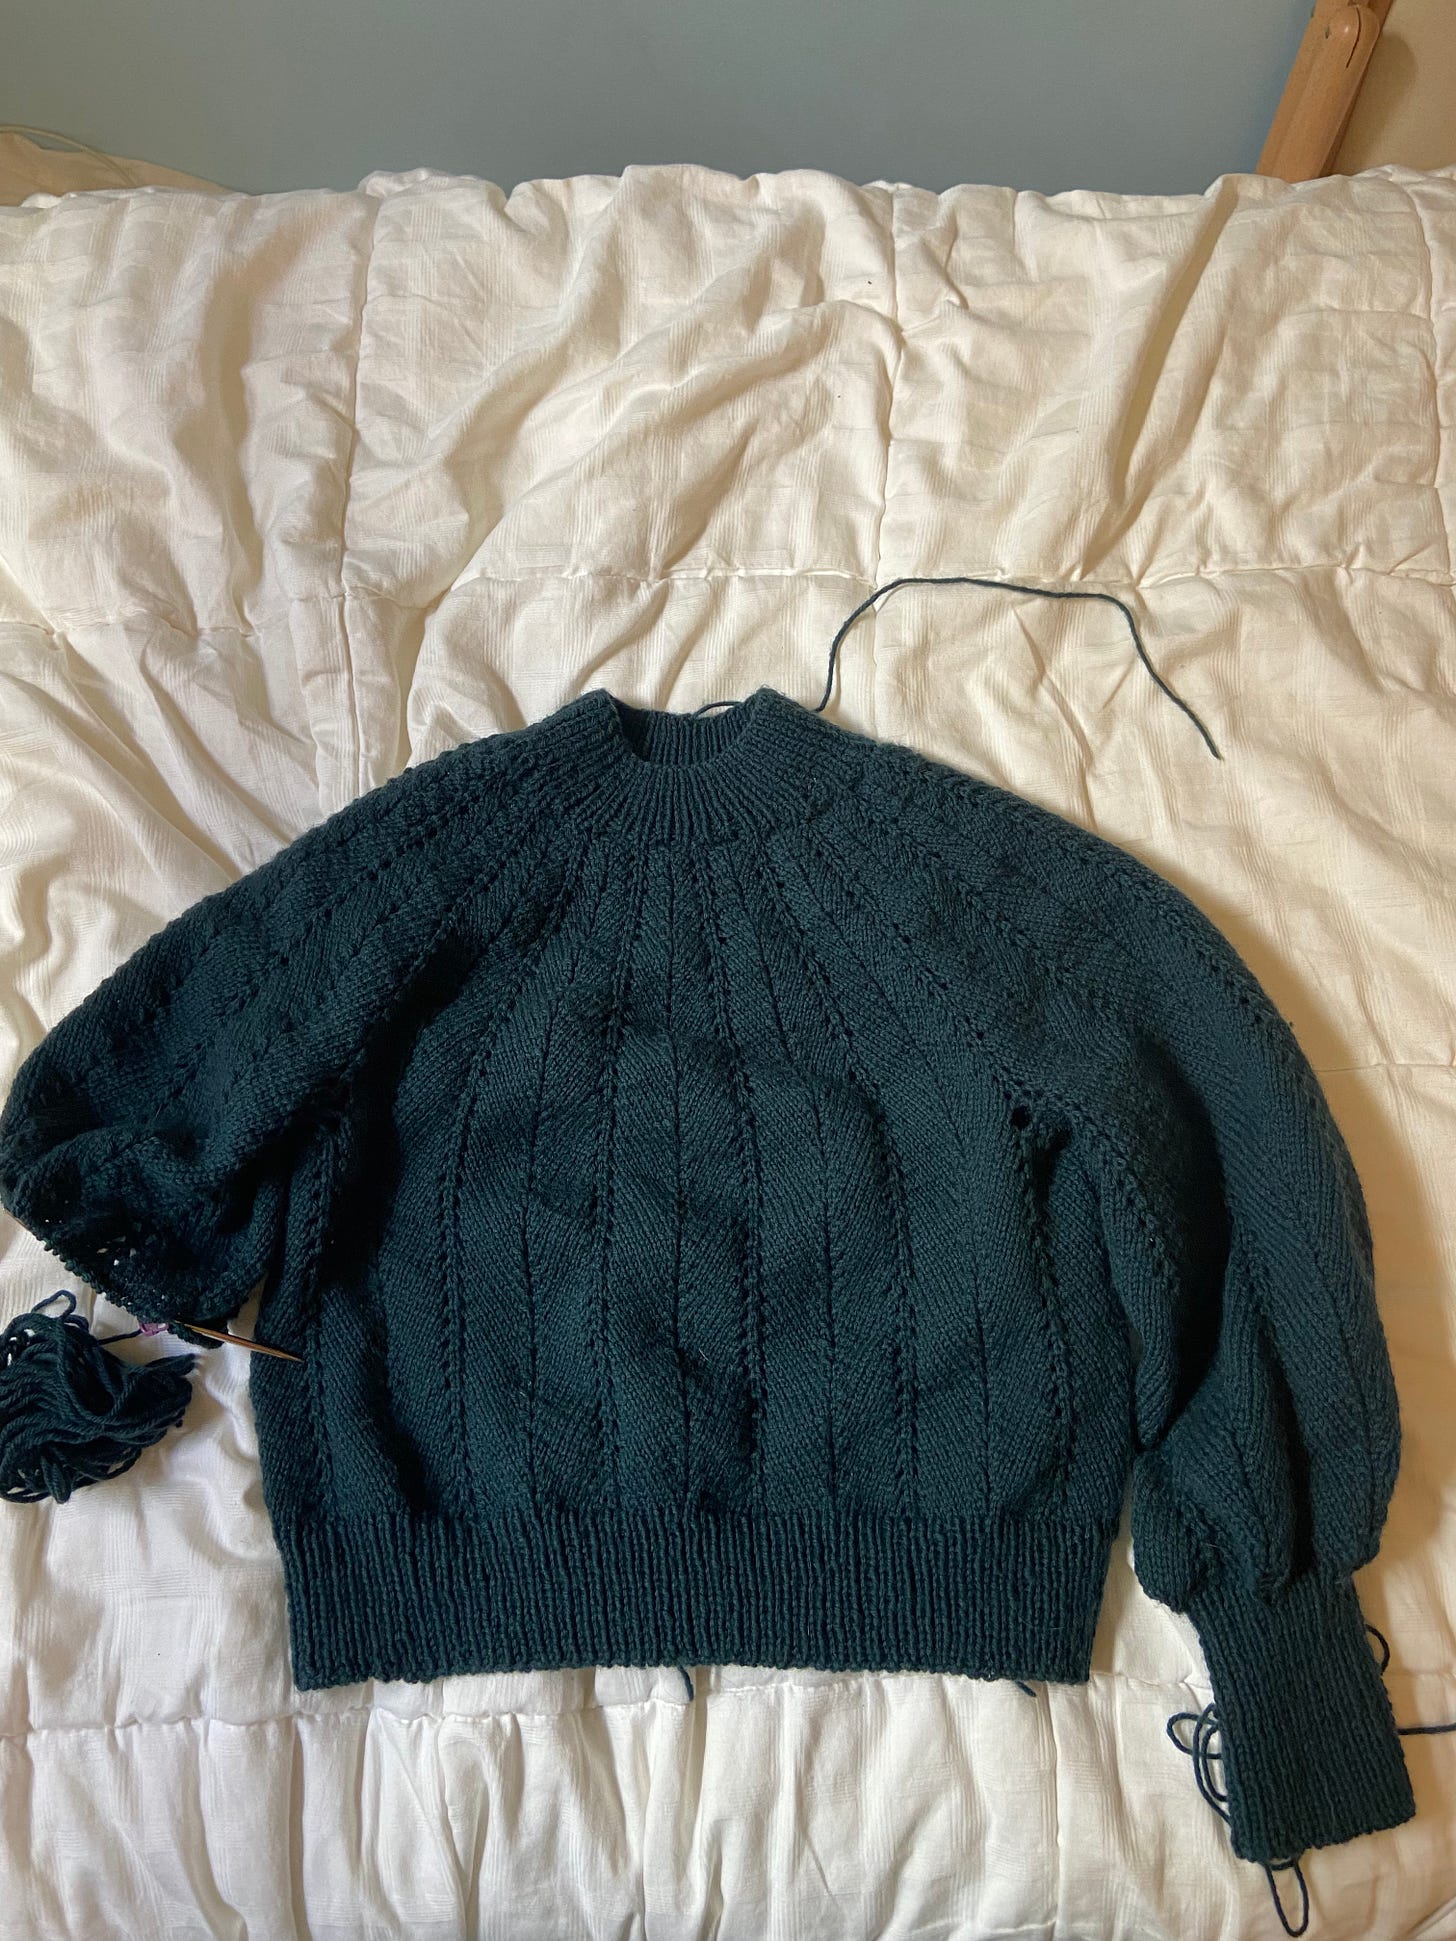 a green sweater with one sleeve half-finished. it has a lacey v-pattern.